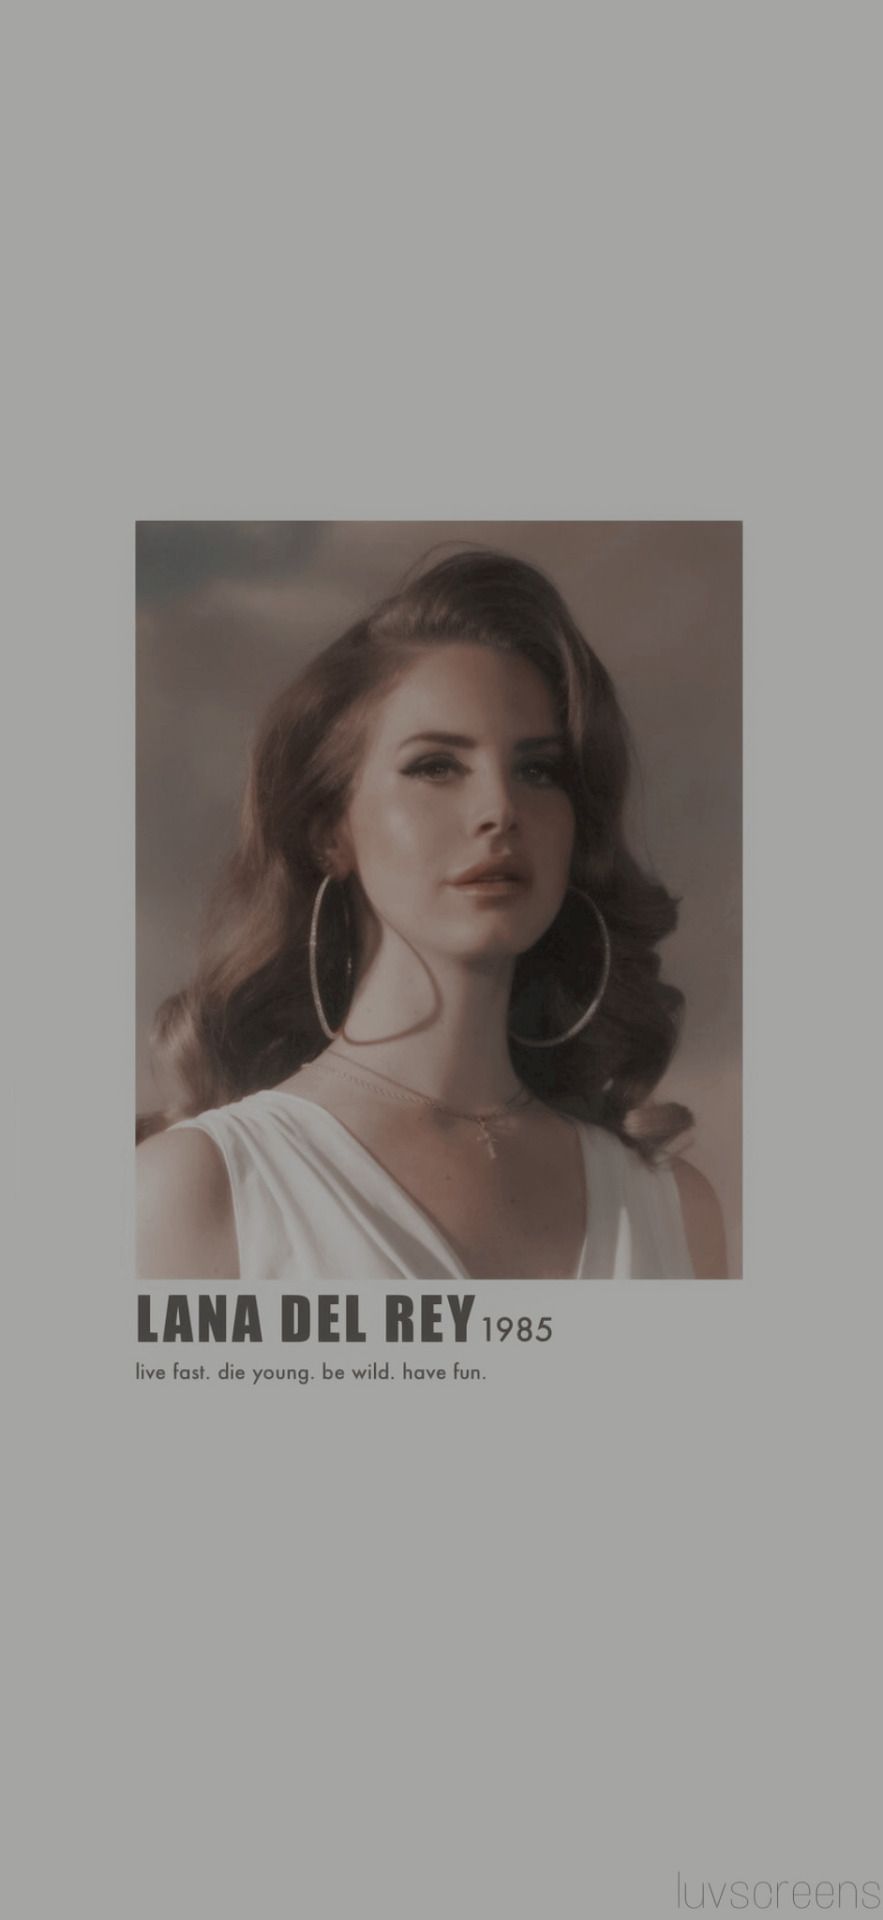 Live fast, die young. Live wild, have fun. - Lana Del Rey